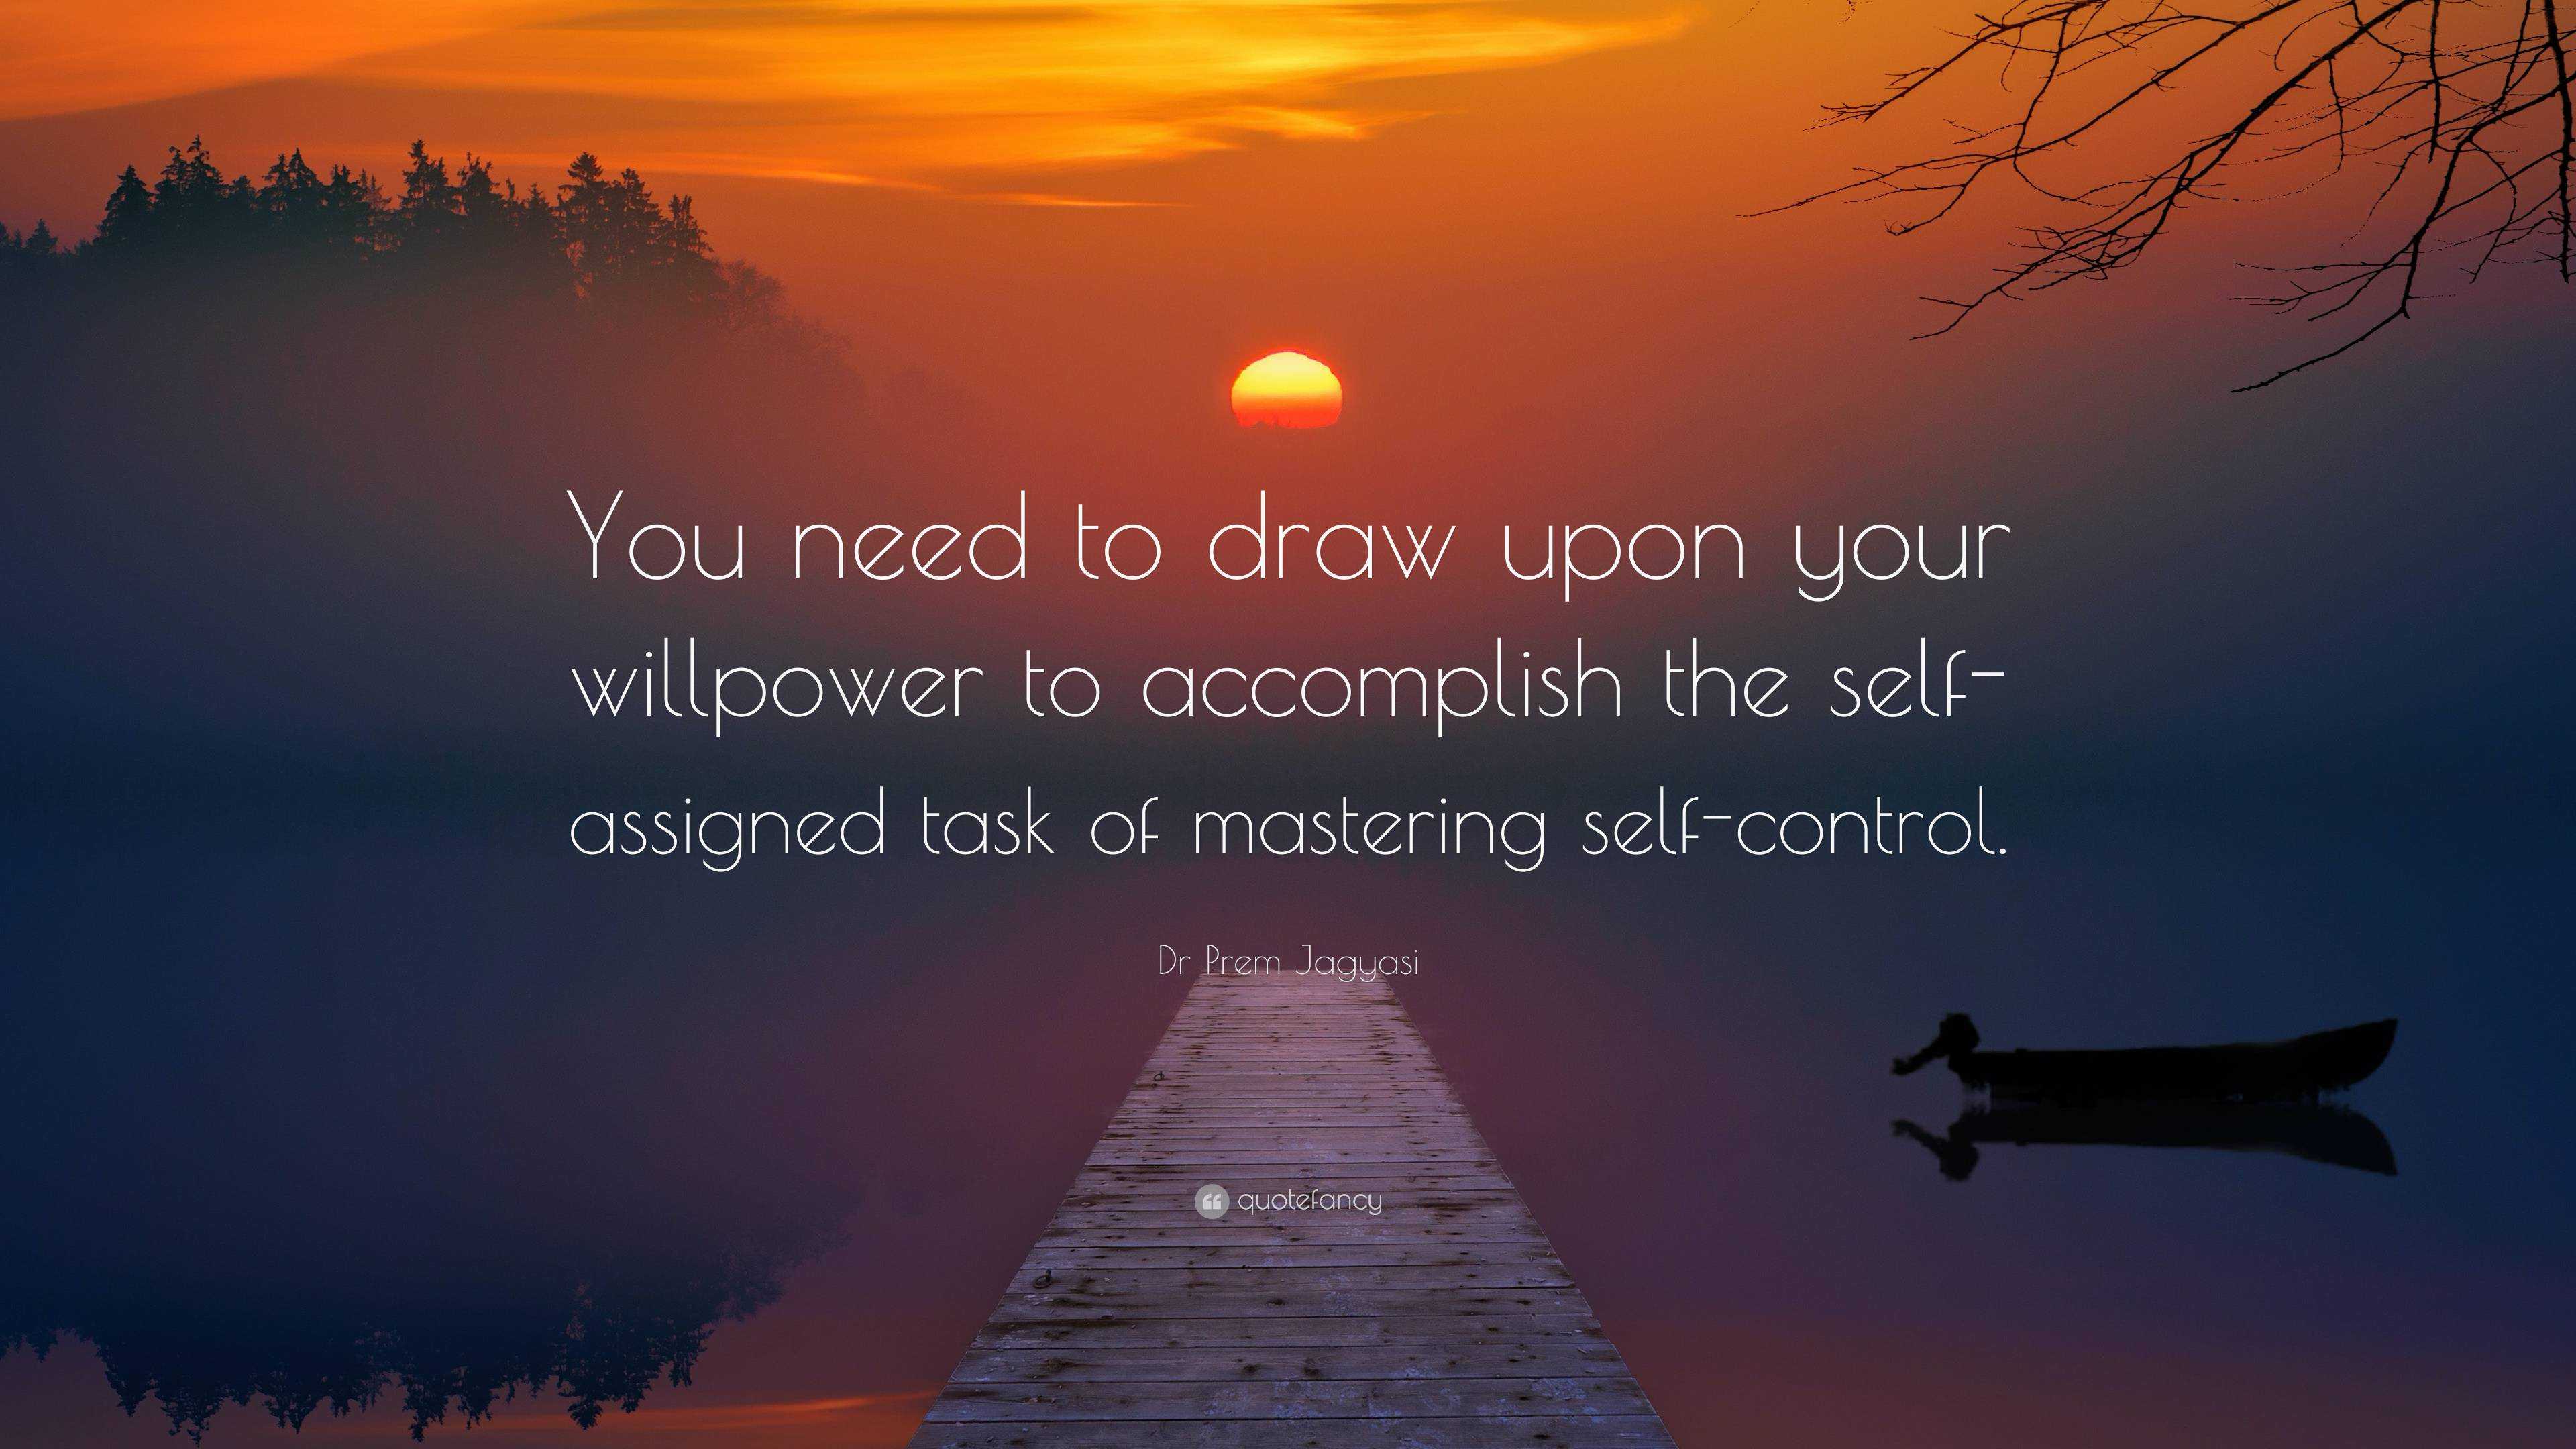 Dr Prem Jagyasi Quote “You need to draw upon your willpower to